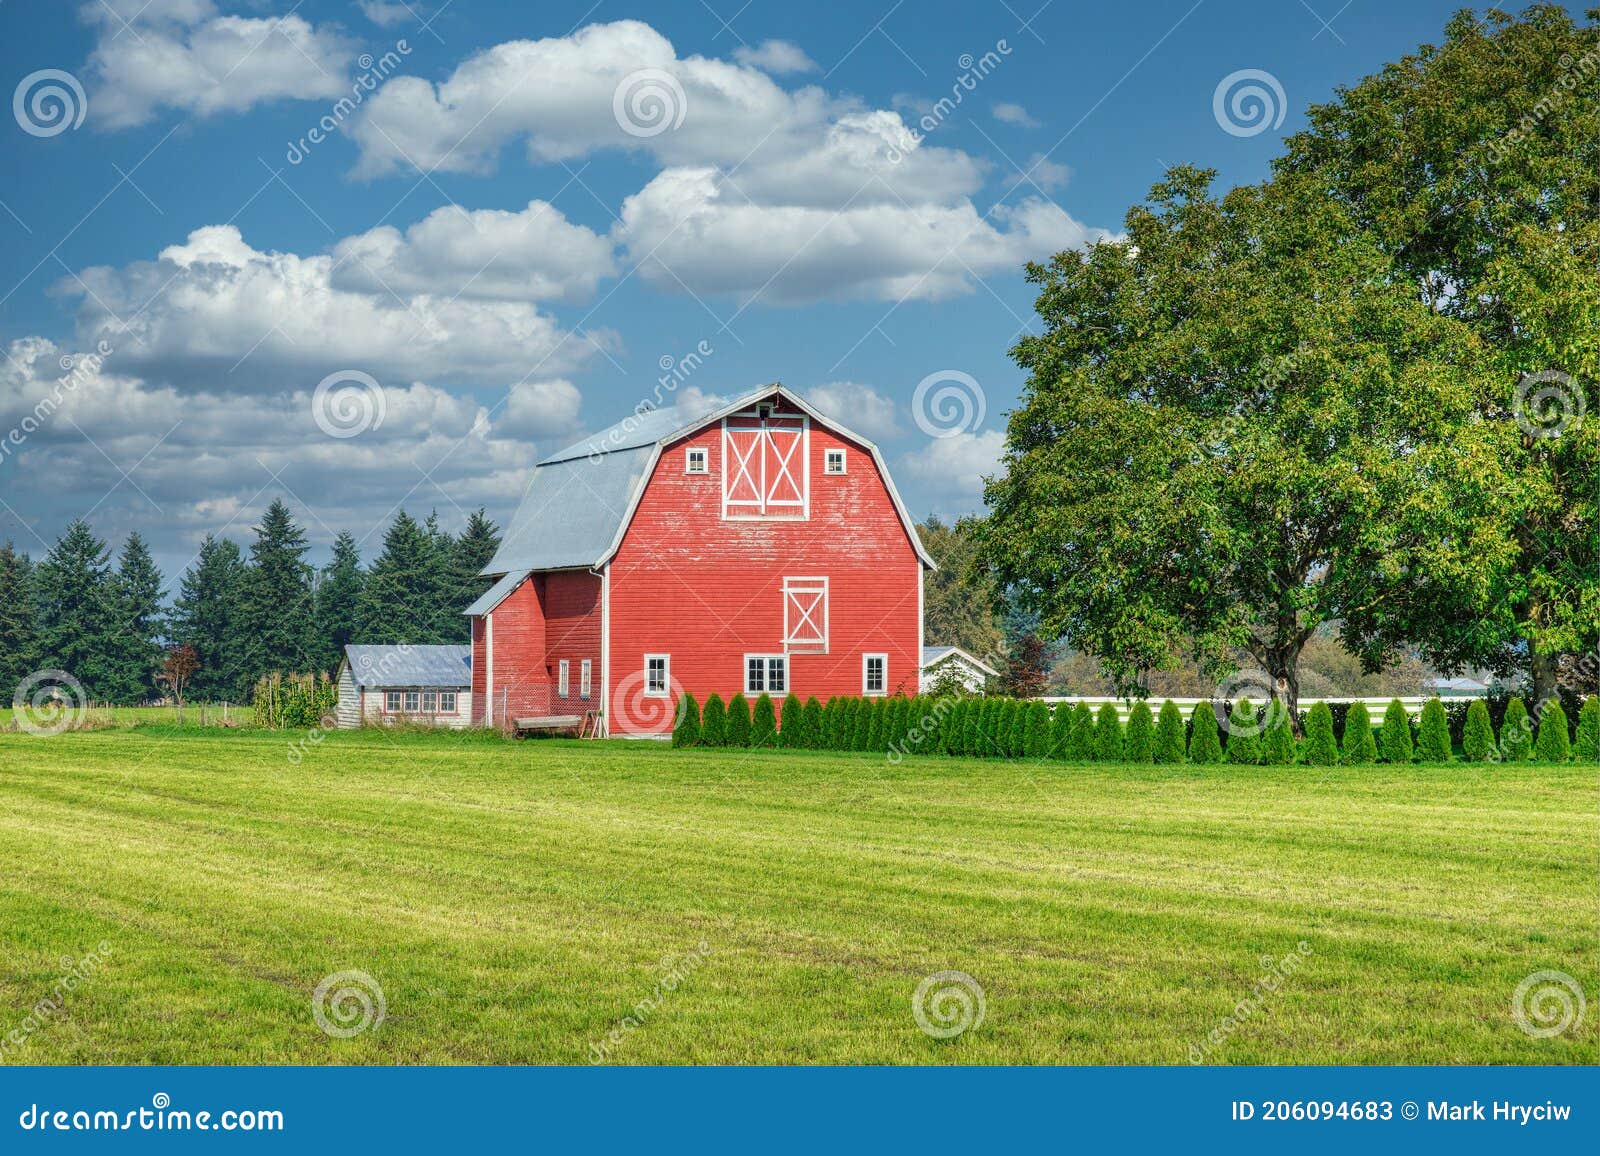 Rural Farm Red Barn Country Scene Cloudy Sky Background Stock